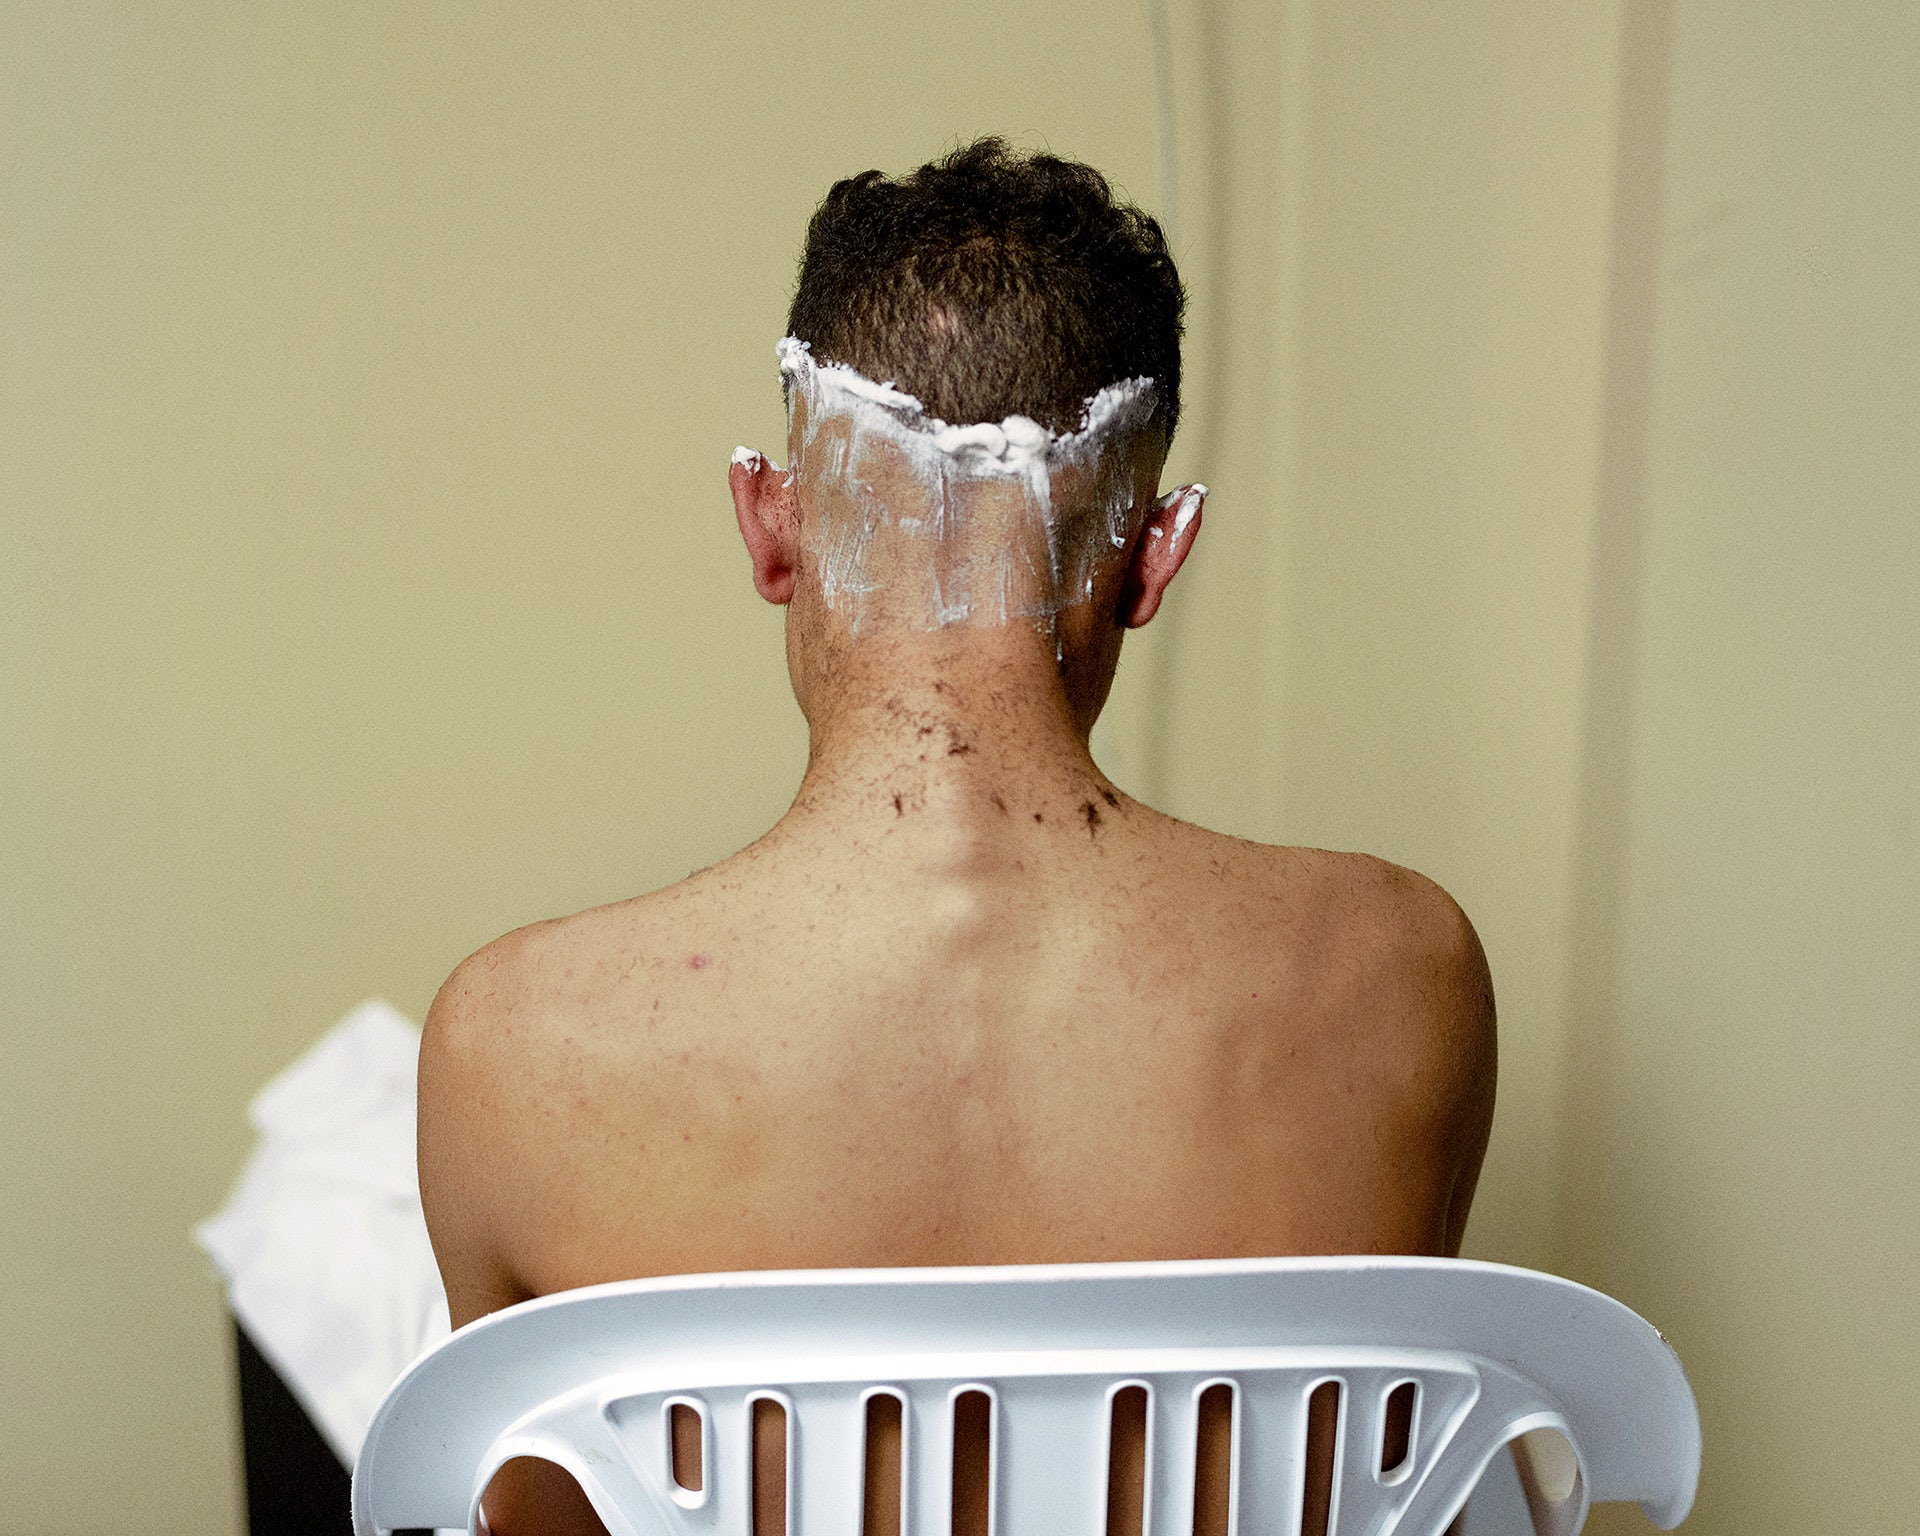 Photograph of a person with shaving cream on the lower half of their head mid-shave, taken from Dialect by Felipe Romero Beltran. The person is sat down in a white chair with their back to the camera